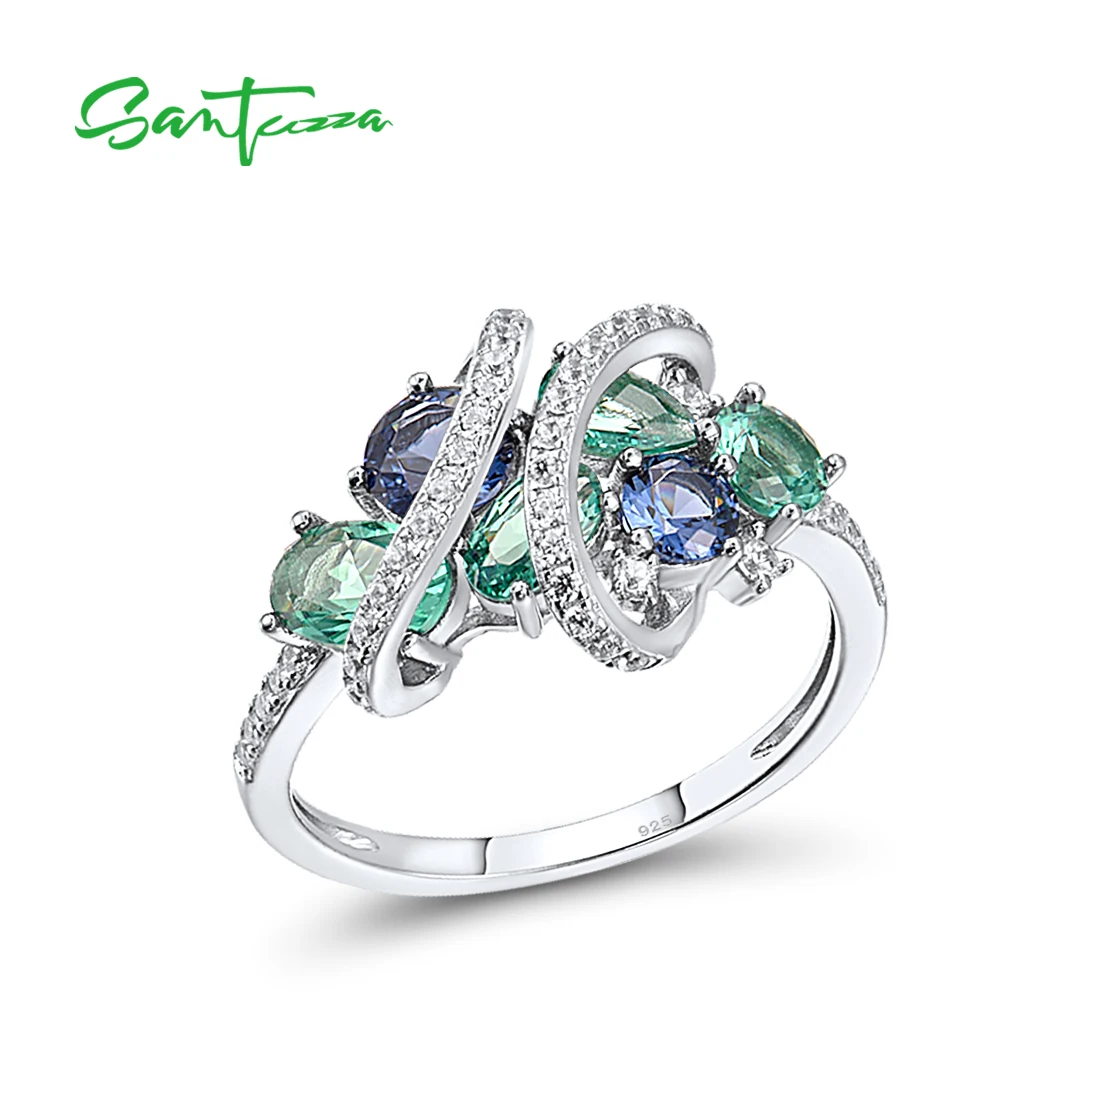 SANTUZZA 925 Sterling Silver Rings For Women Green Blue Spinel White CZ Gemstone Original anillos Wedding Gifts Fine Jewelry